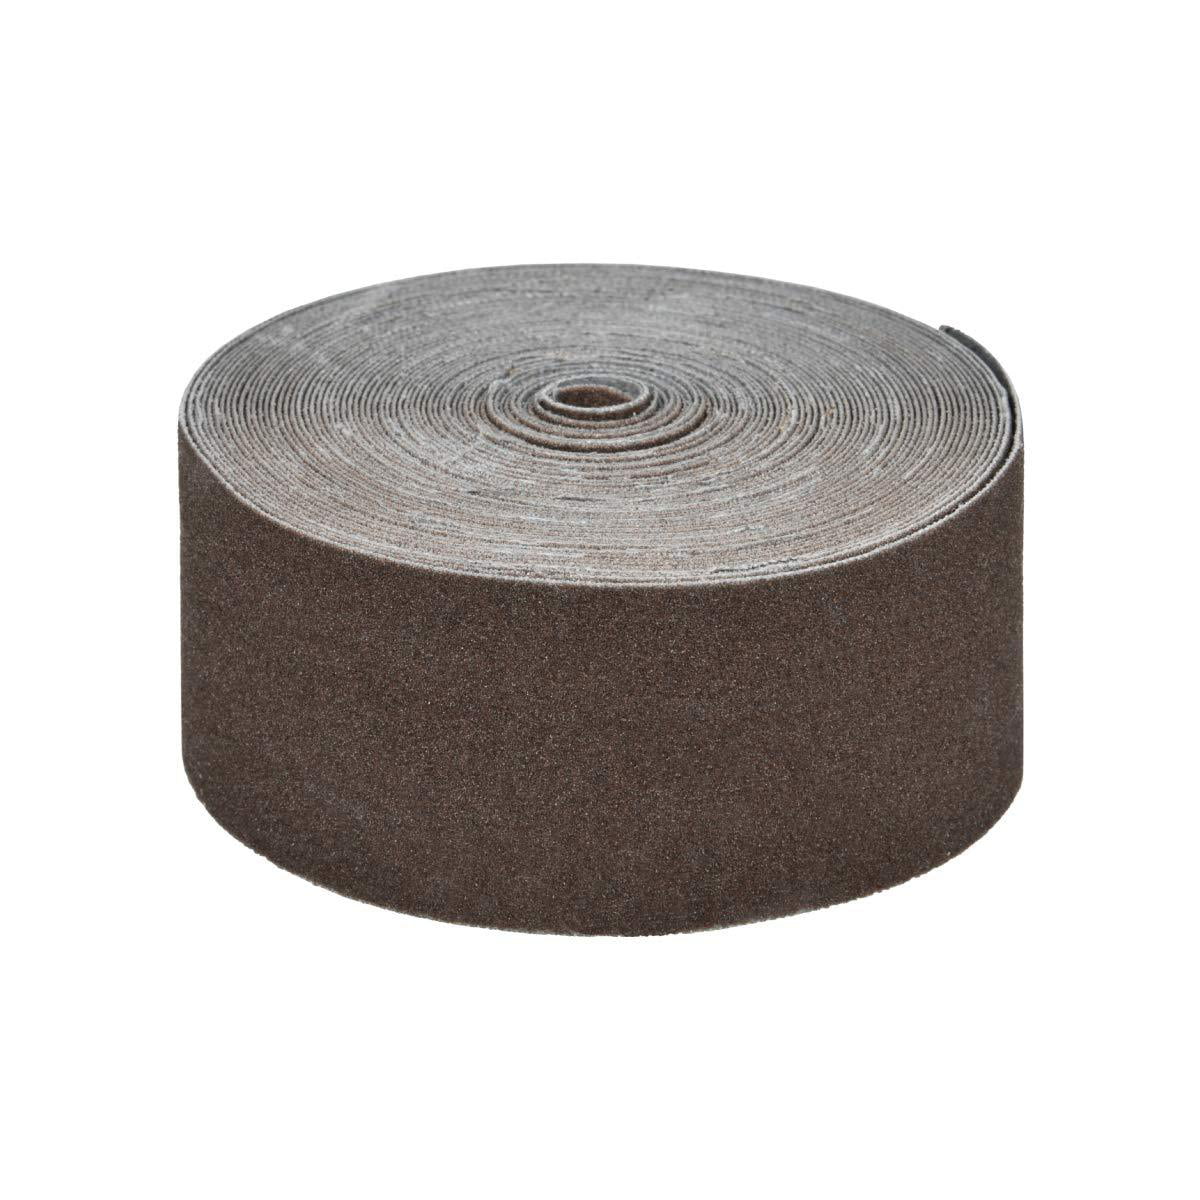 7/8-Inch Arbor Type 27 1/4-Inch Thickness Hot Max 26035 9-Inch Hubless Grinding Wheel